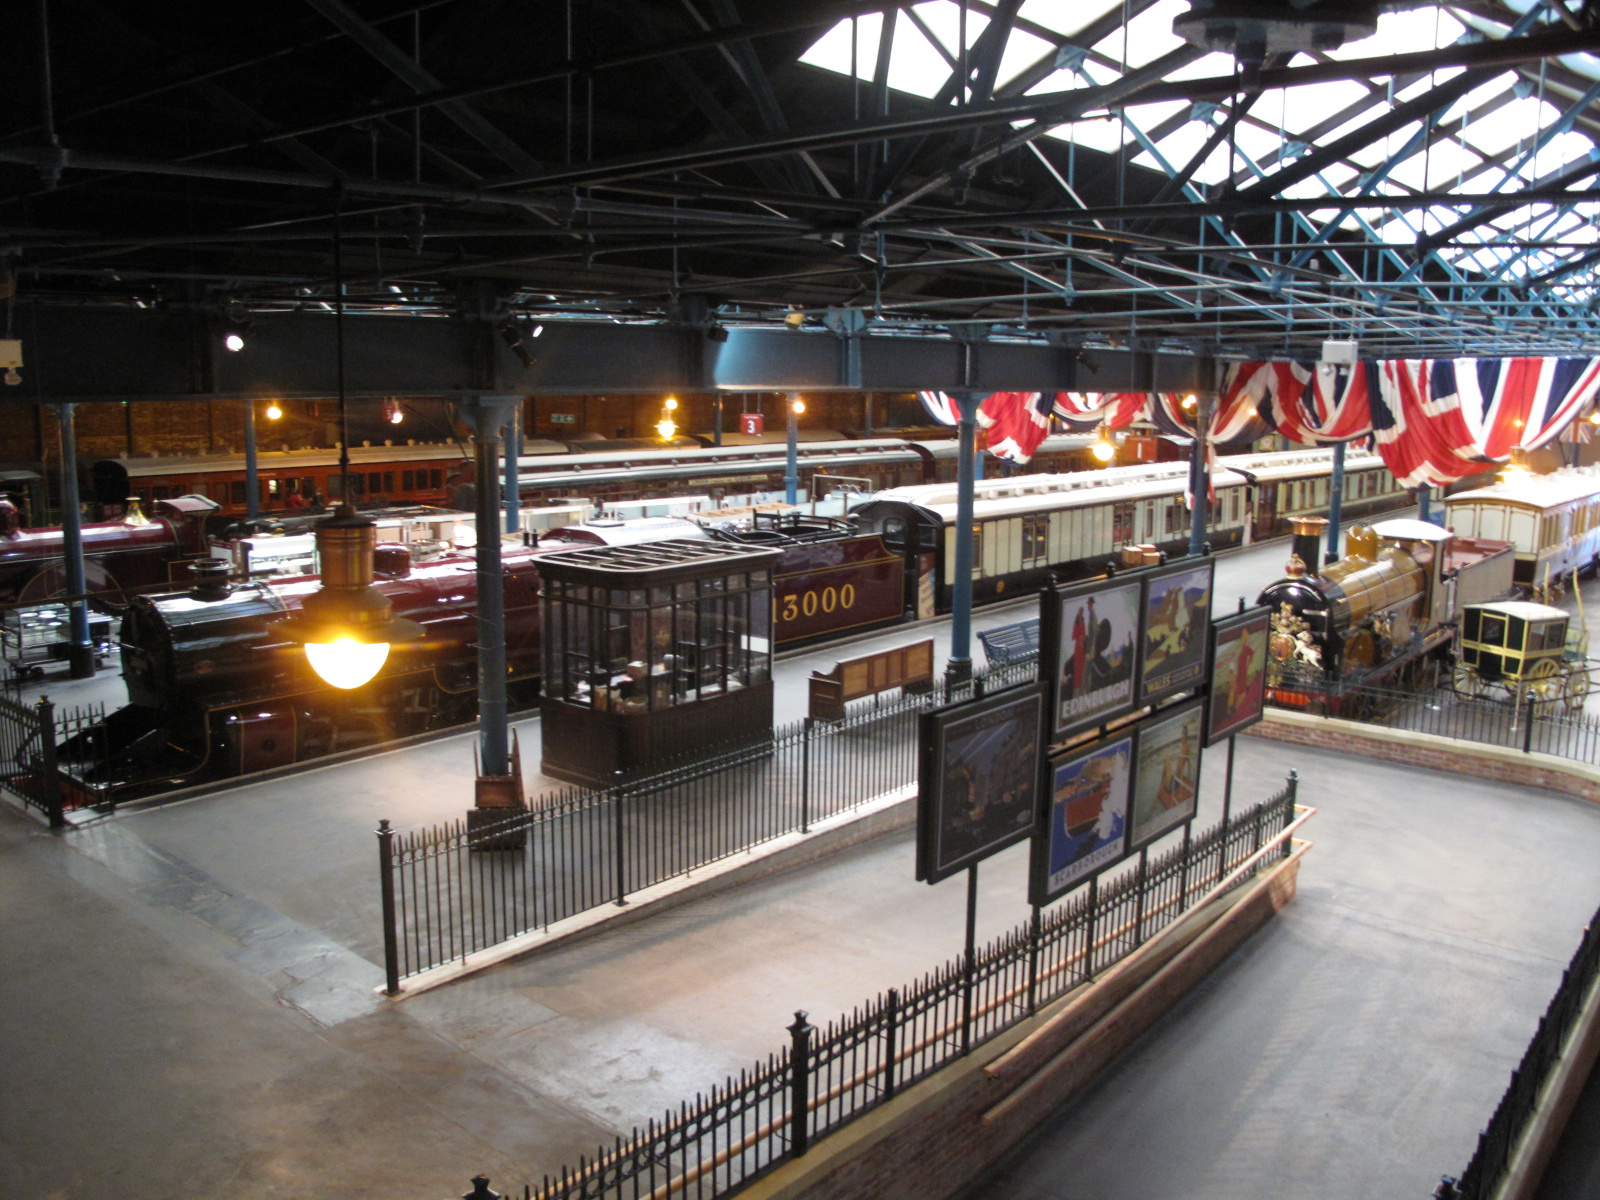 But my favourite image of the last few weeks has to be this one - I think it shows just how far we've come in redeveloping Station Hall, and transforming it into an atmospheric space.